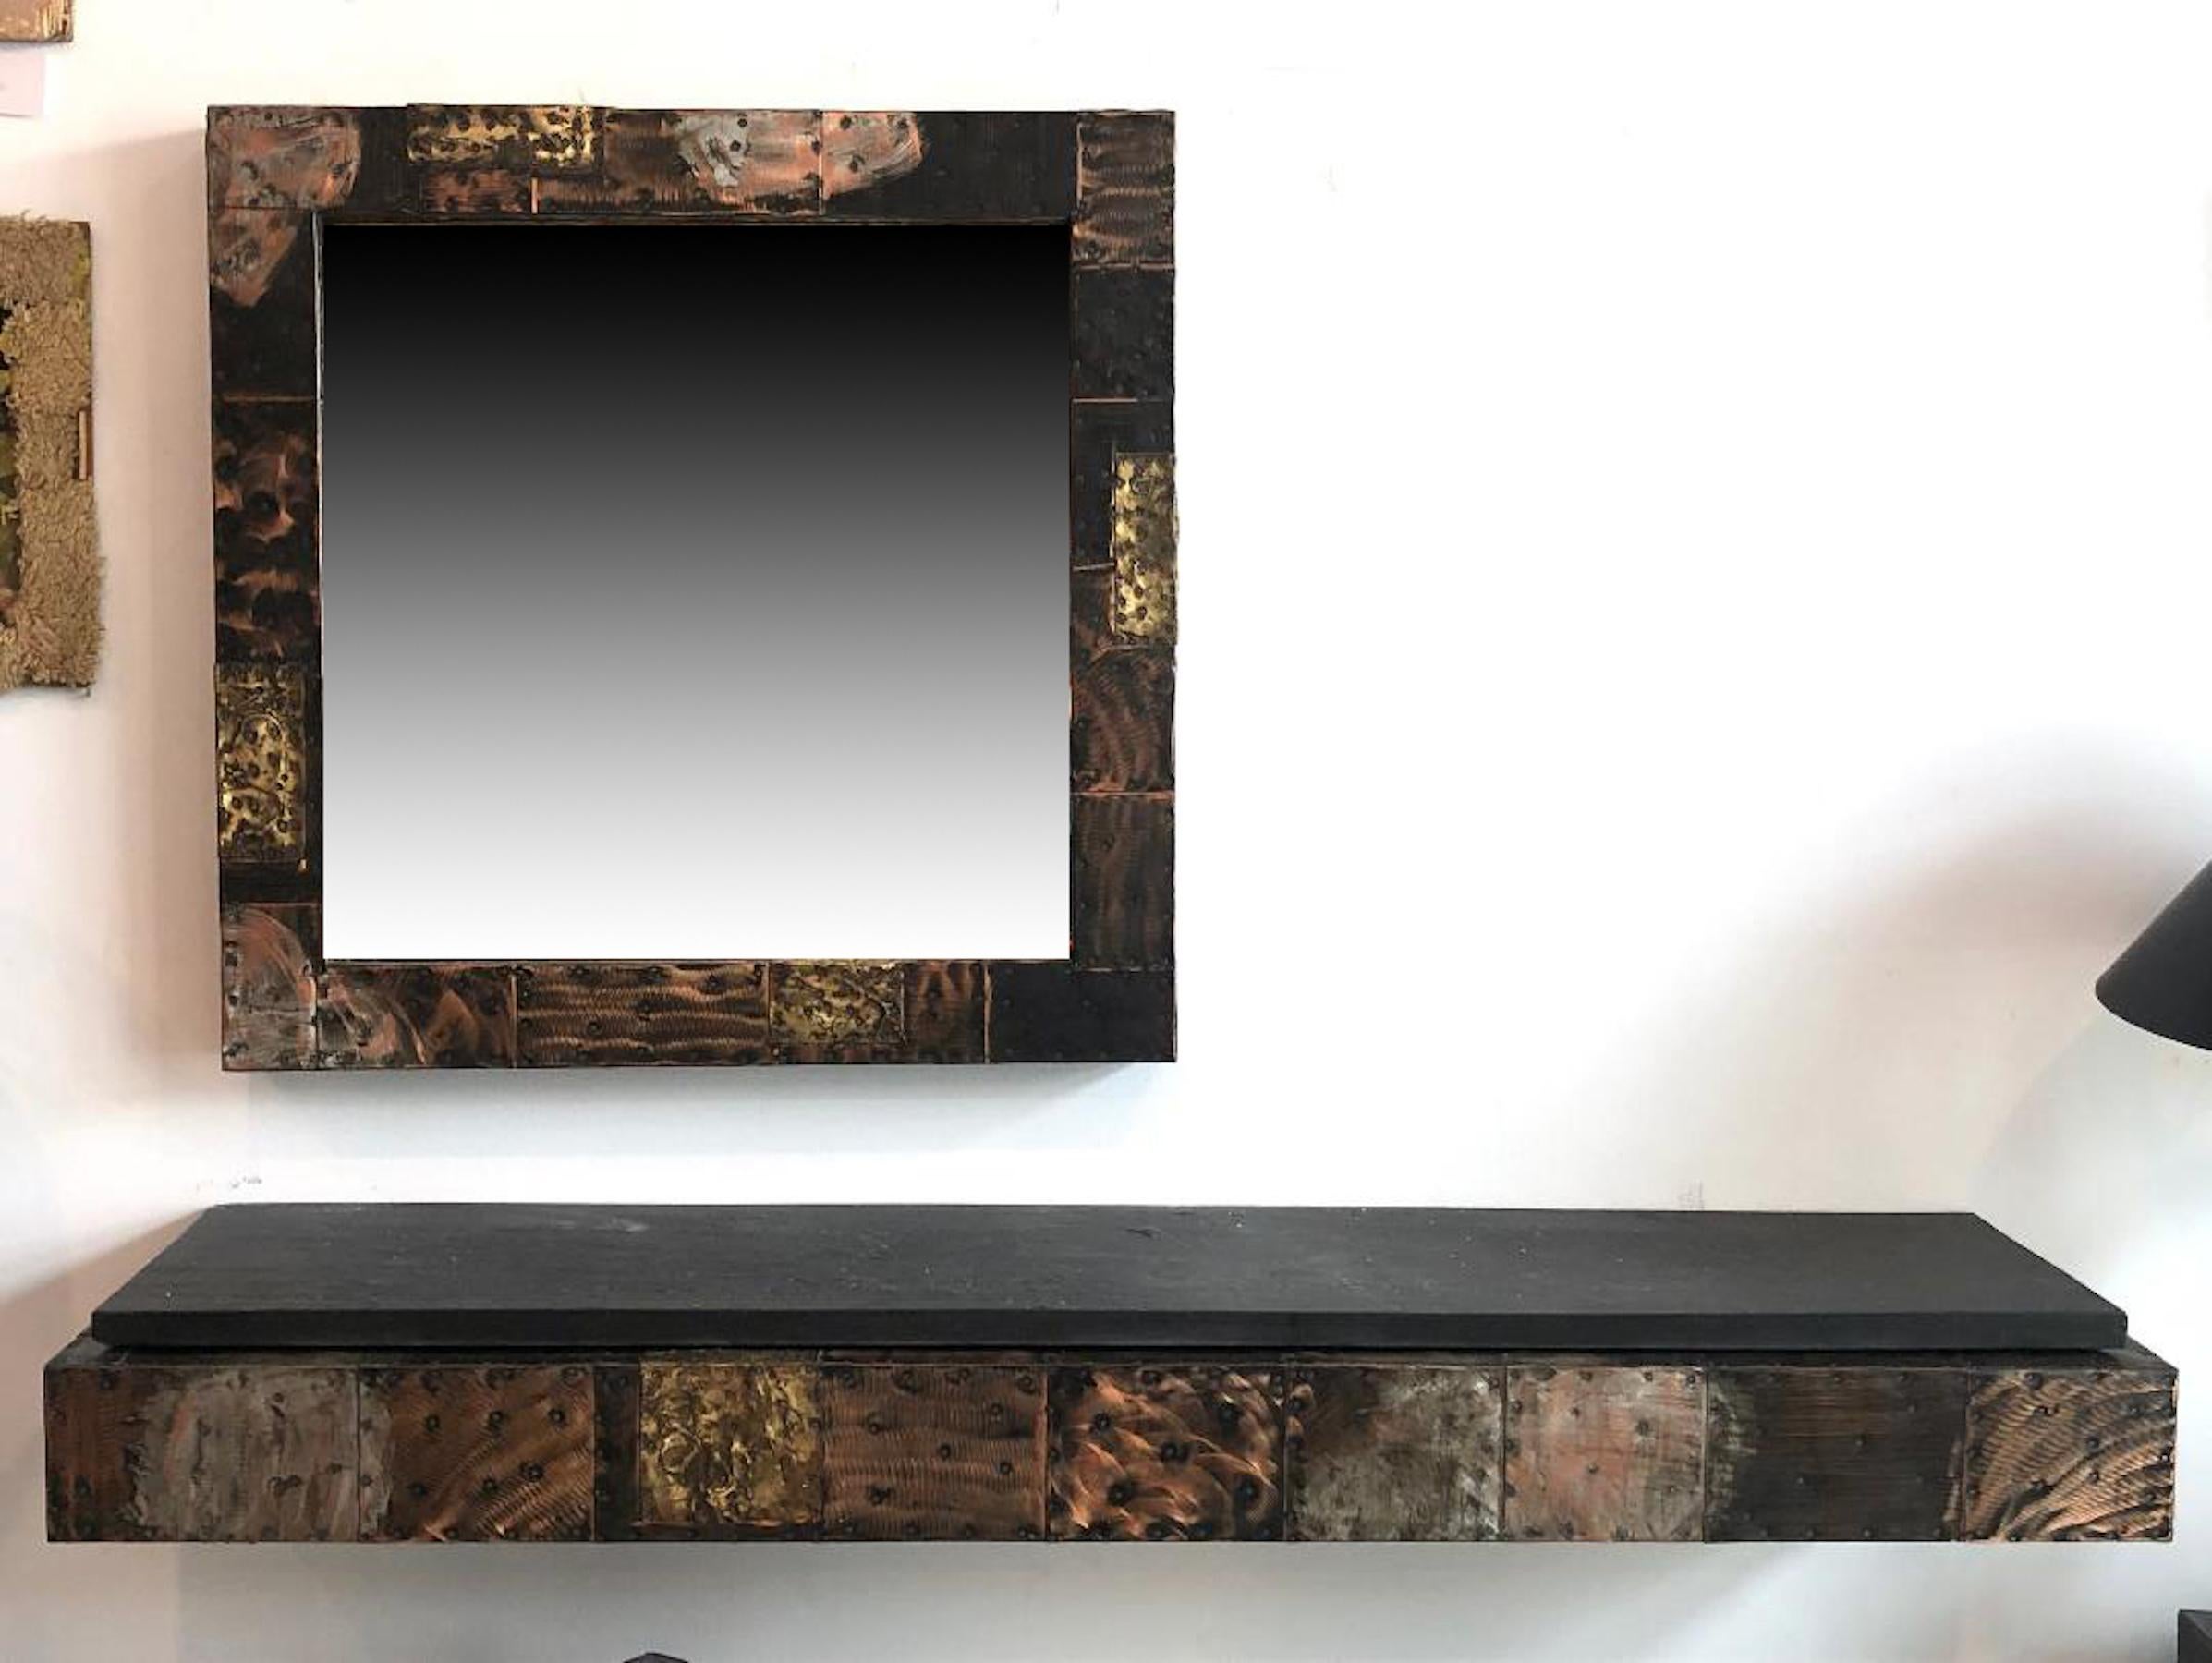 Paul Evans
Wall-mounted console, model PE 17 and mirror, model PE 18
Paul Evans Studio for Directional, USA, circa 1970
Welded and enameled steel, welded and enameled copper, slate, mirror
Console measures: 60 W × 13 D × 7 H inches
Slate: